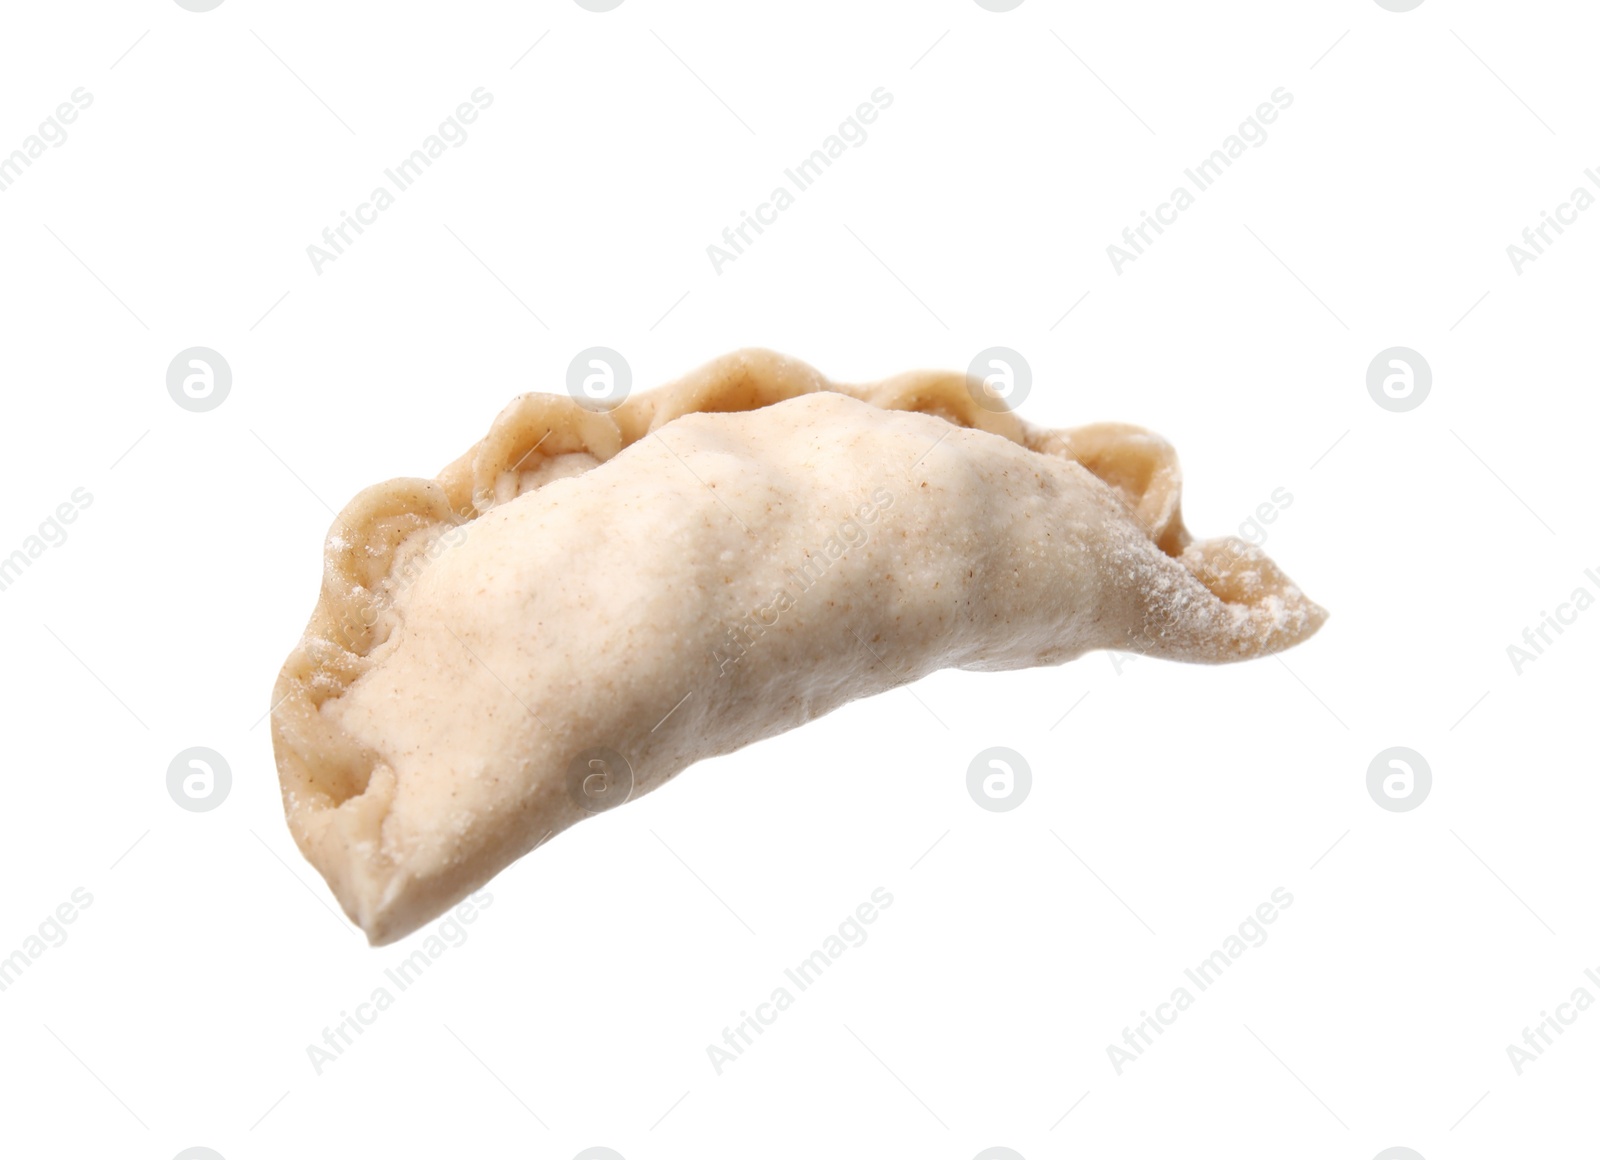 Photo of Raw dumpling (varenyk) with cottage cheese isolated on white